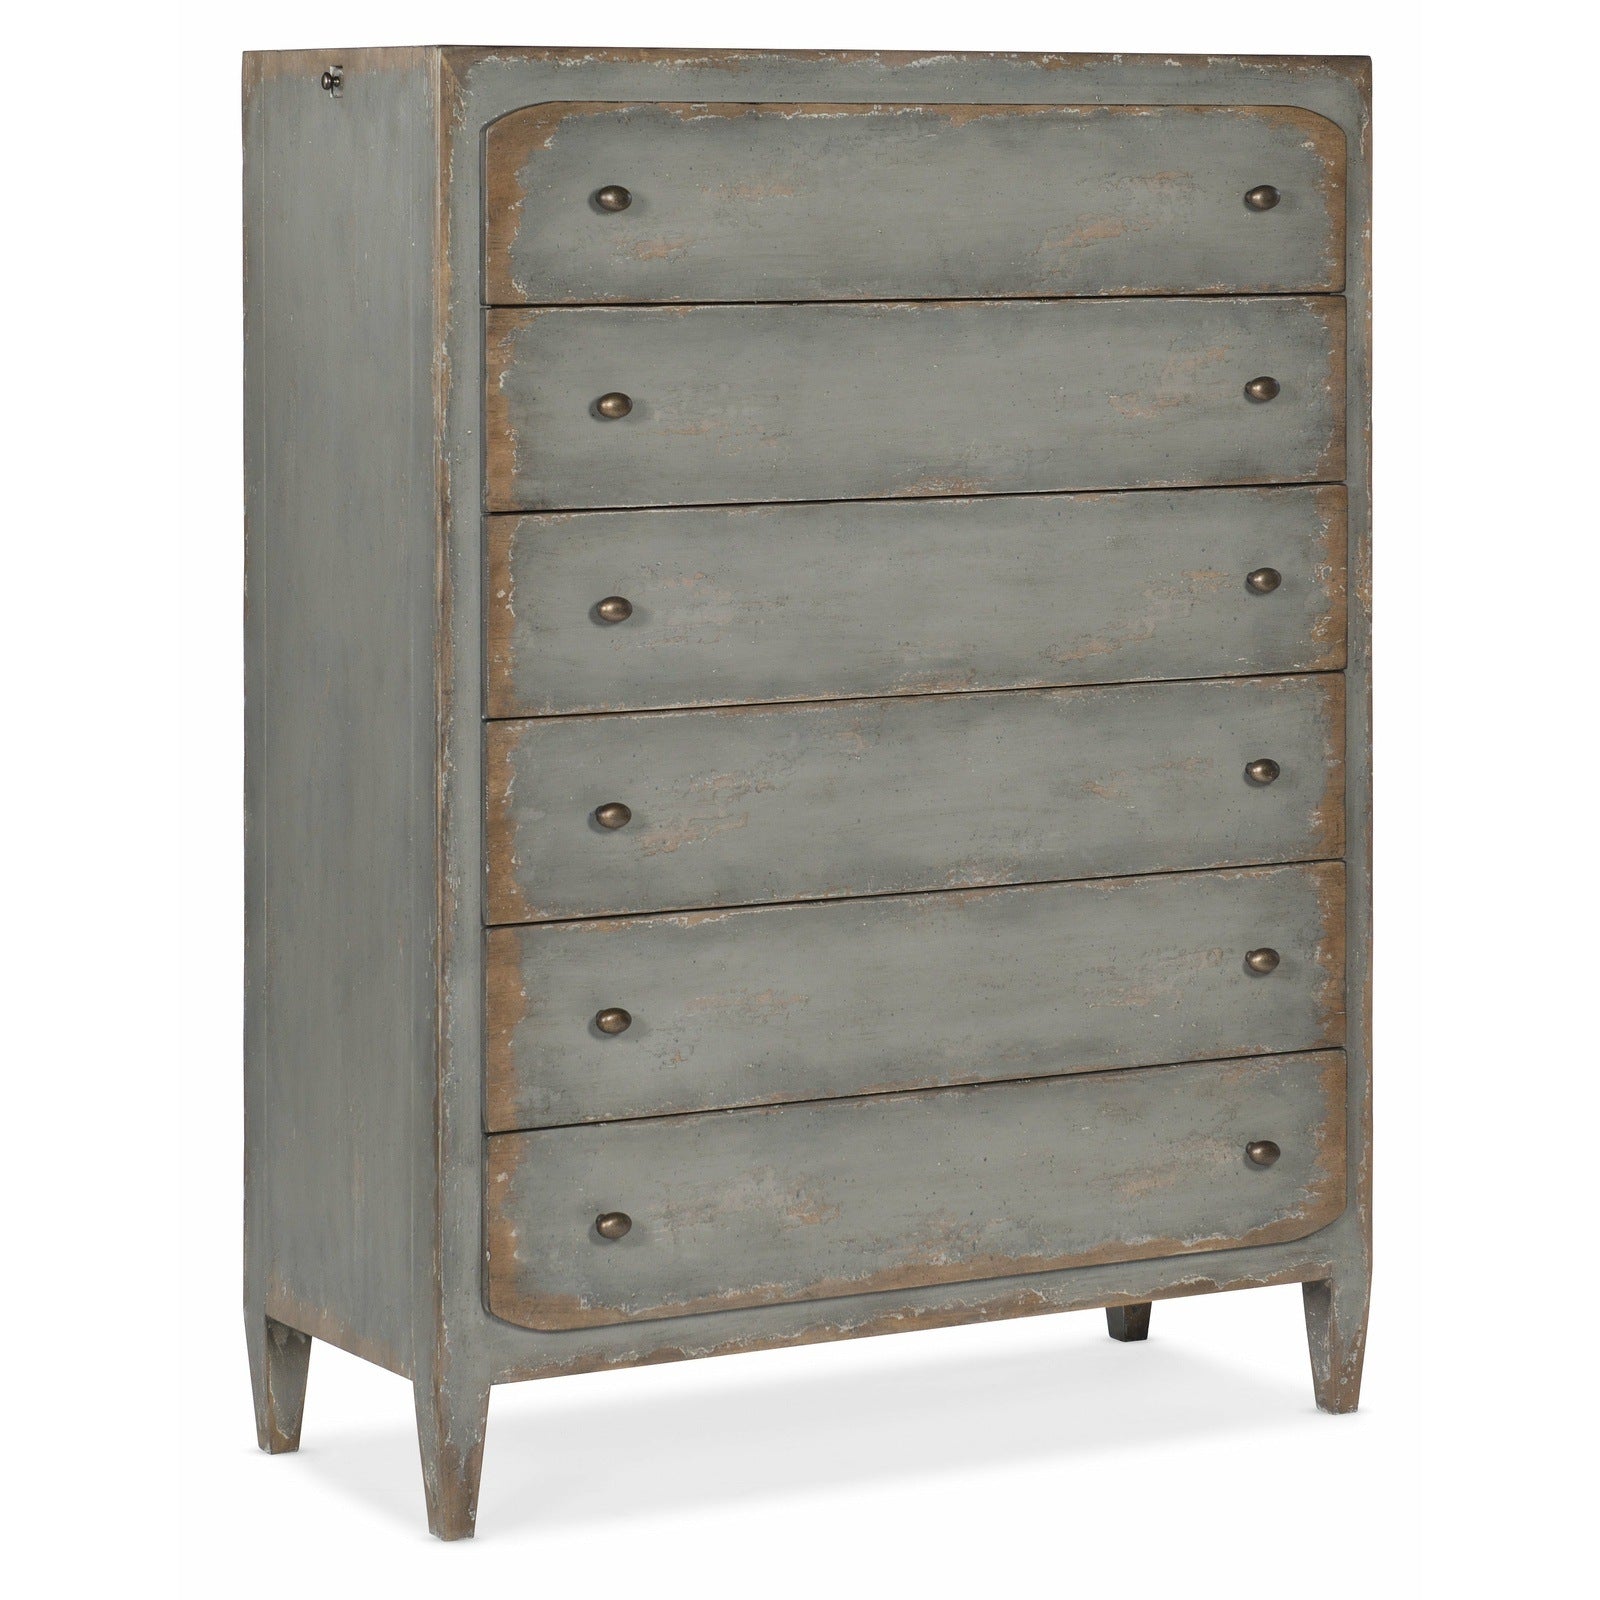 Ciao Bella Six Drawer Chest